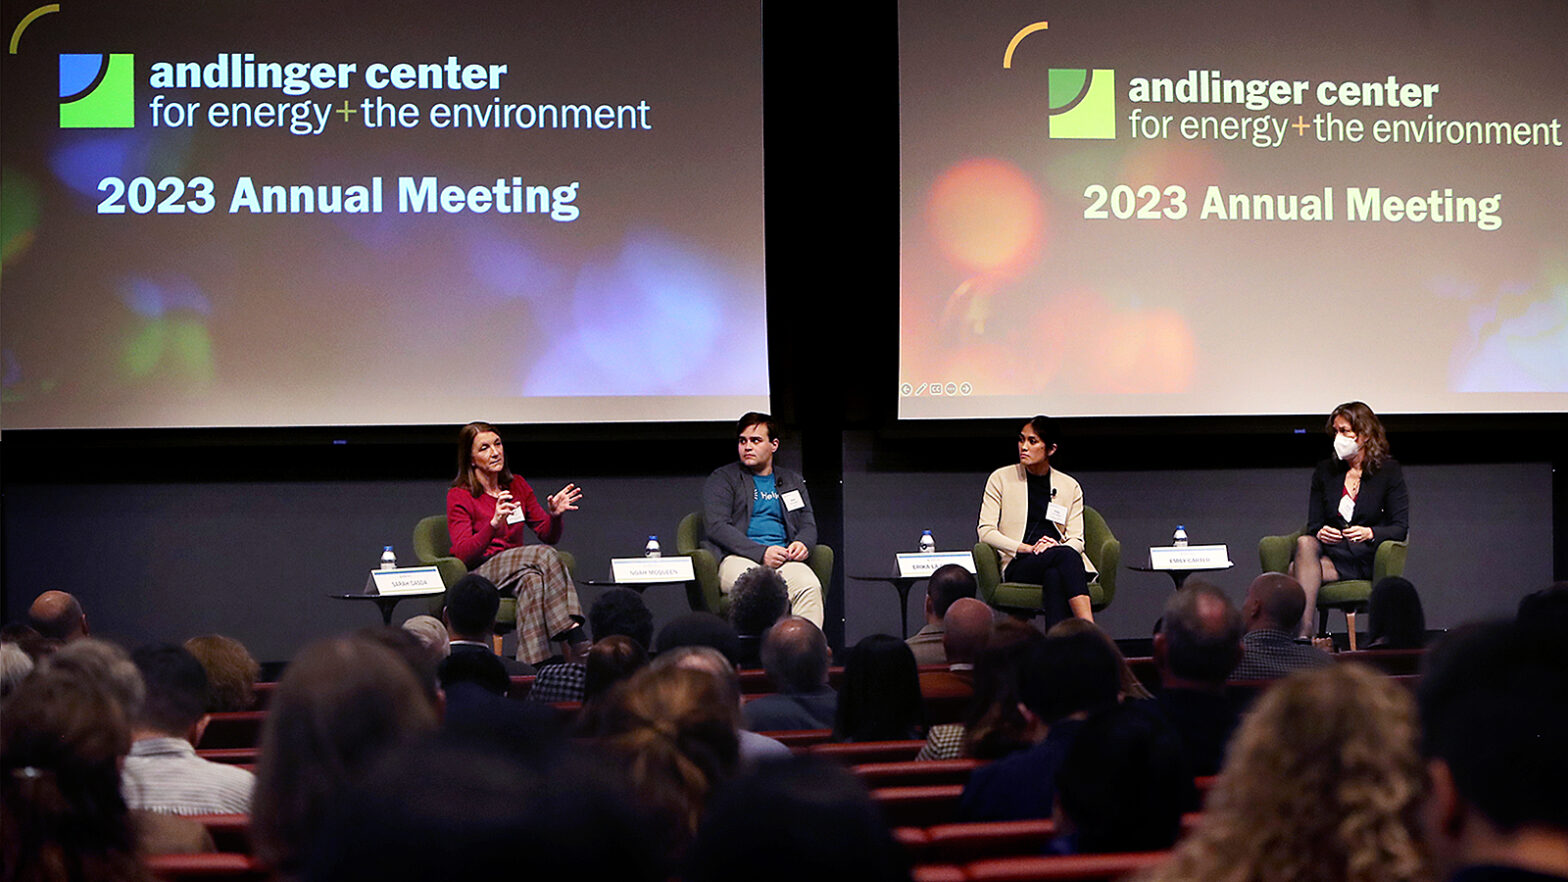 Four people share a stage during a panel discussion.